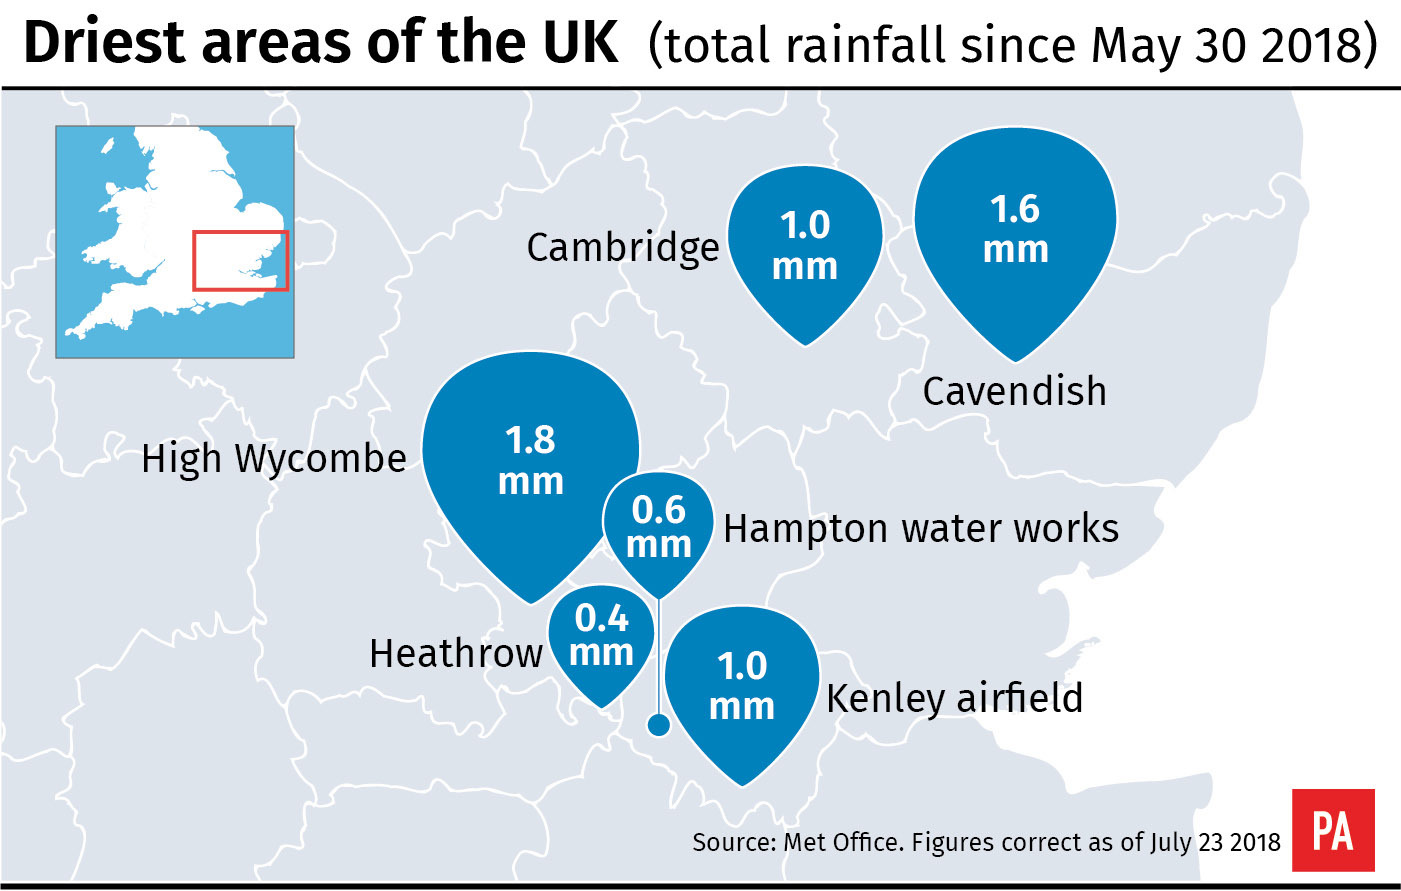 Driest areas of the UK